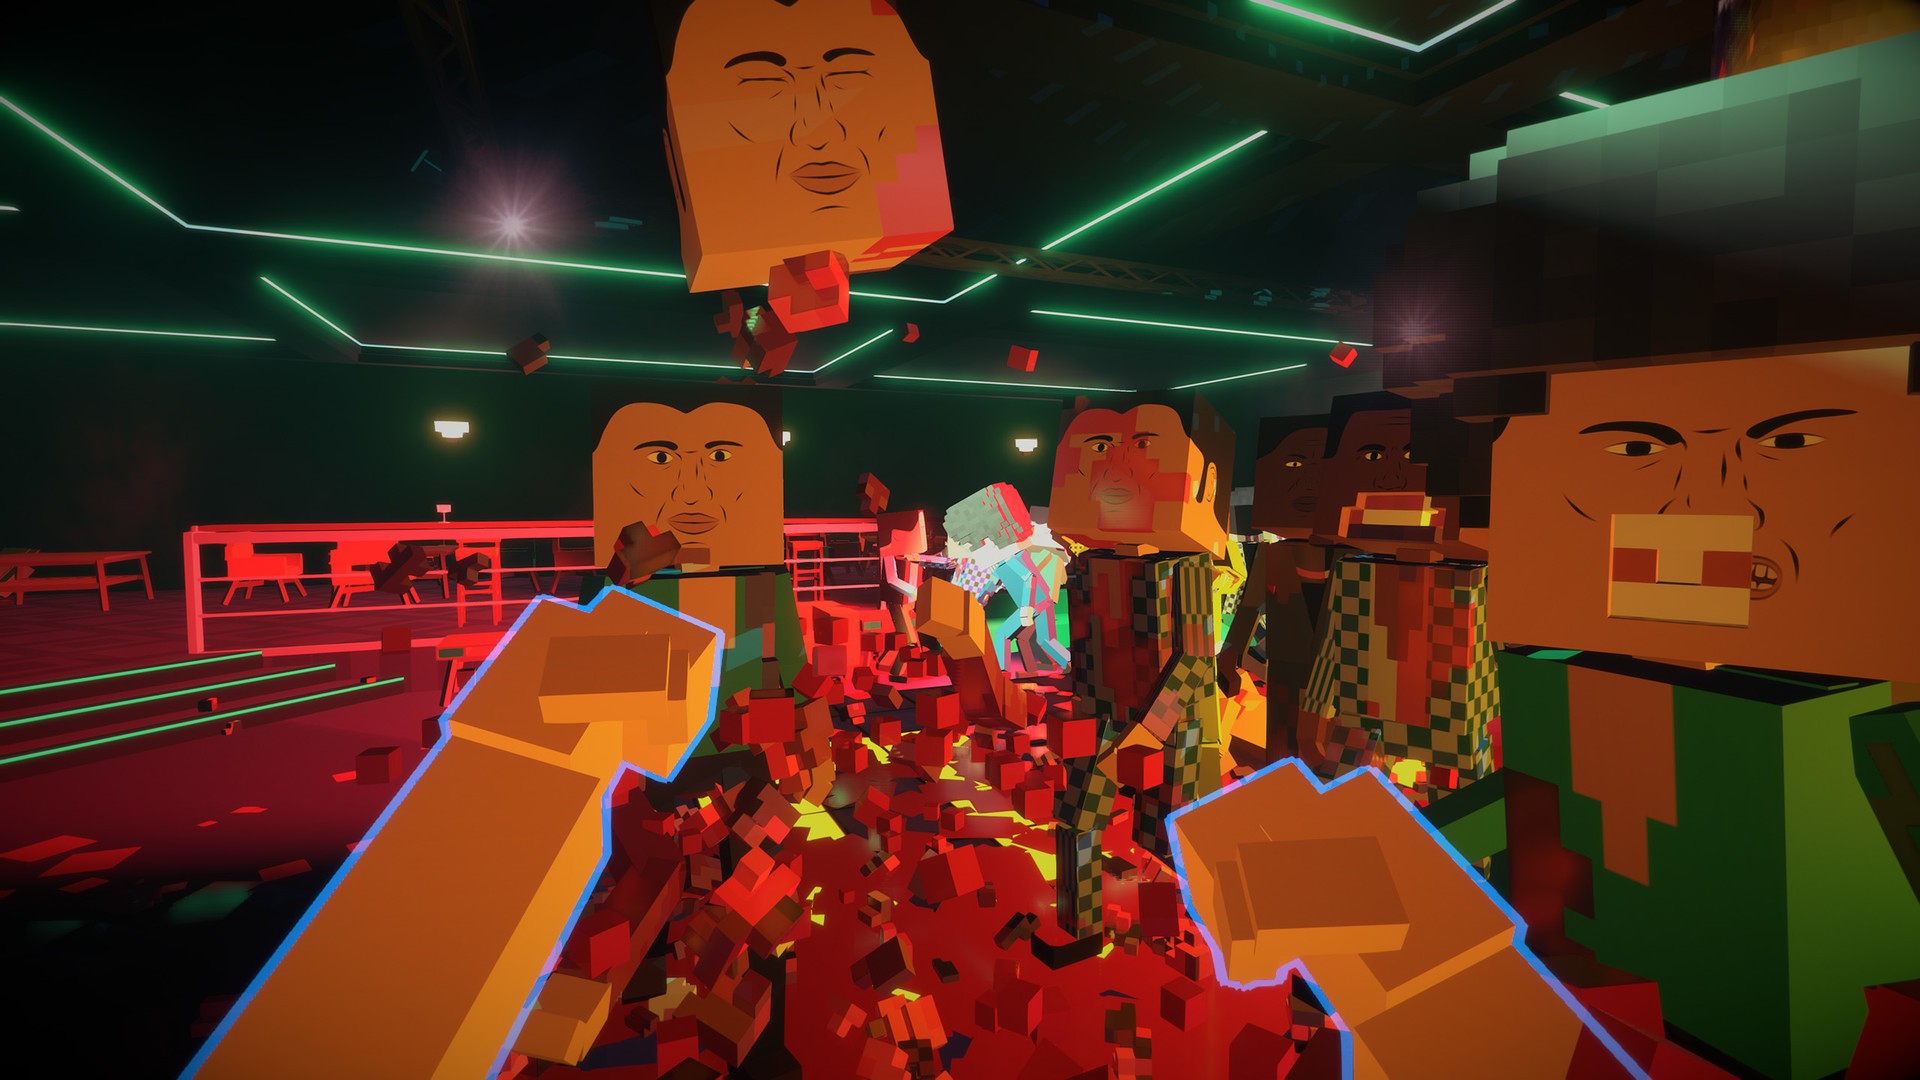 paint the town red vr